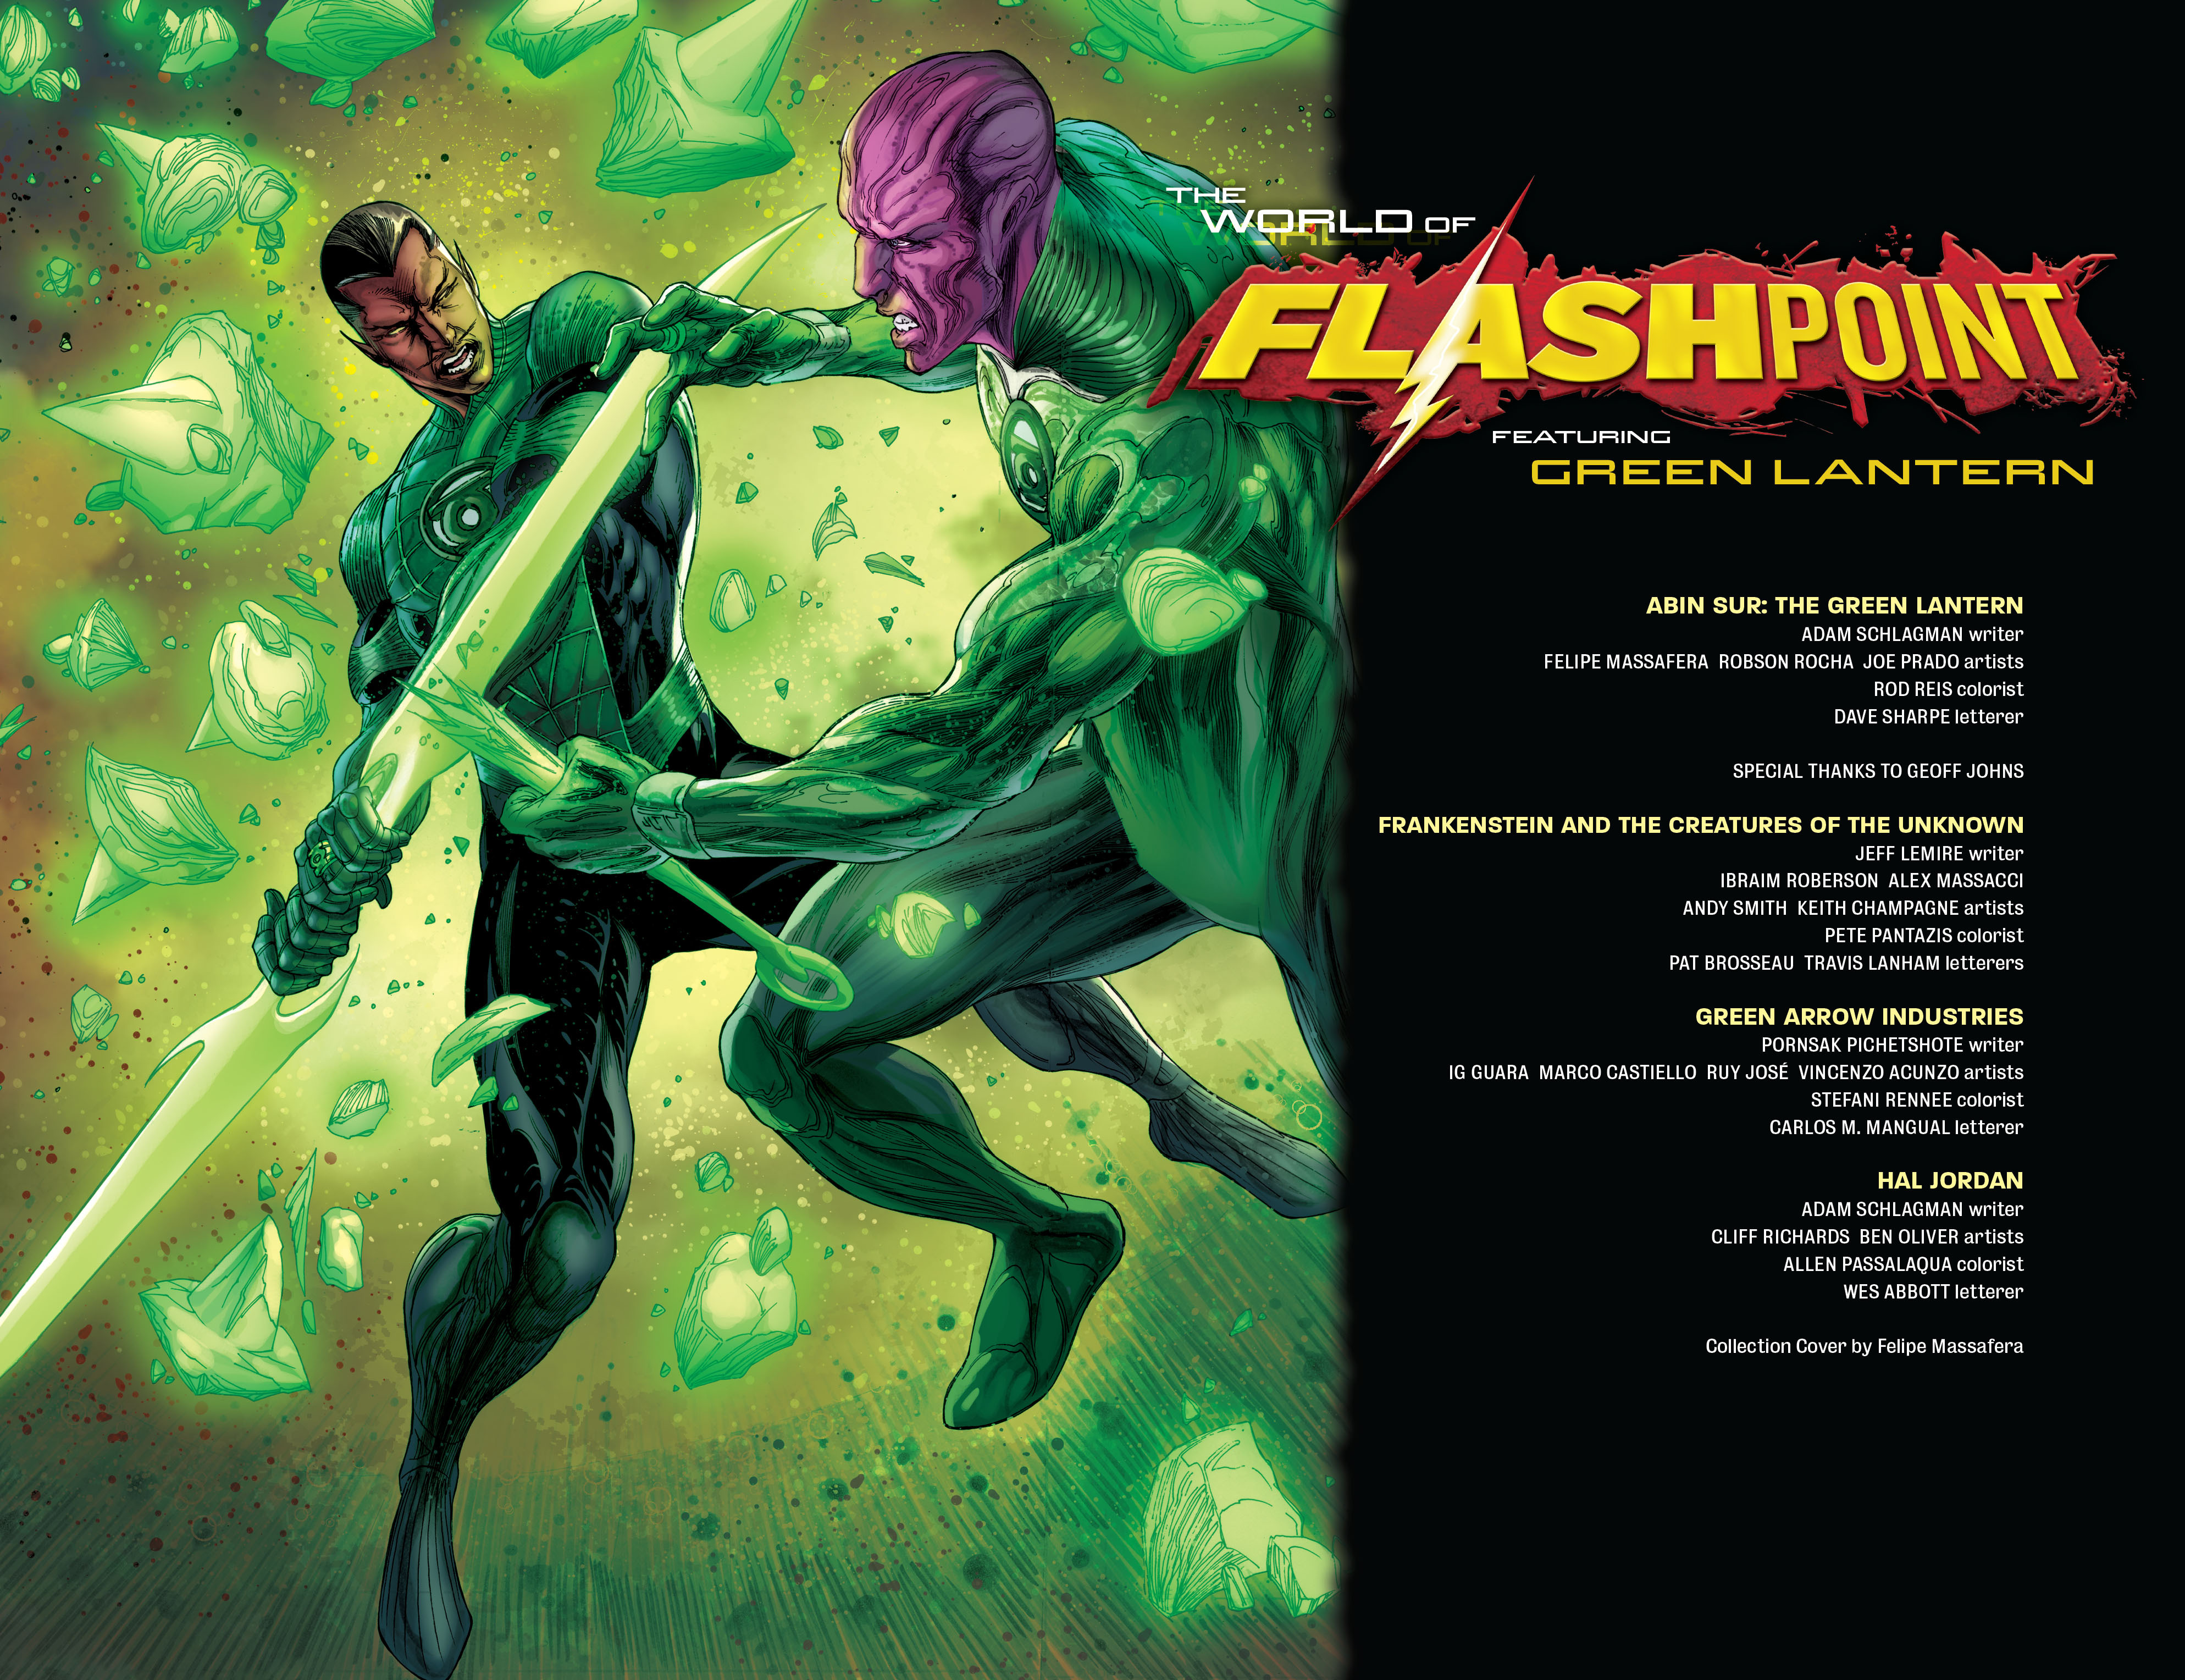 Flashpoint: The World of Flashpoint Featuring Green Lantern Full #1 - English 3